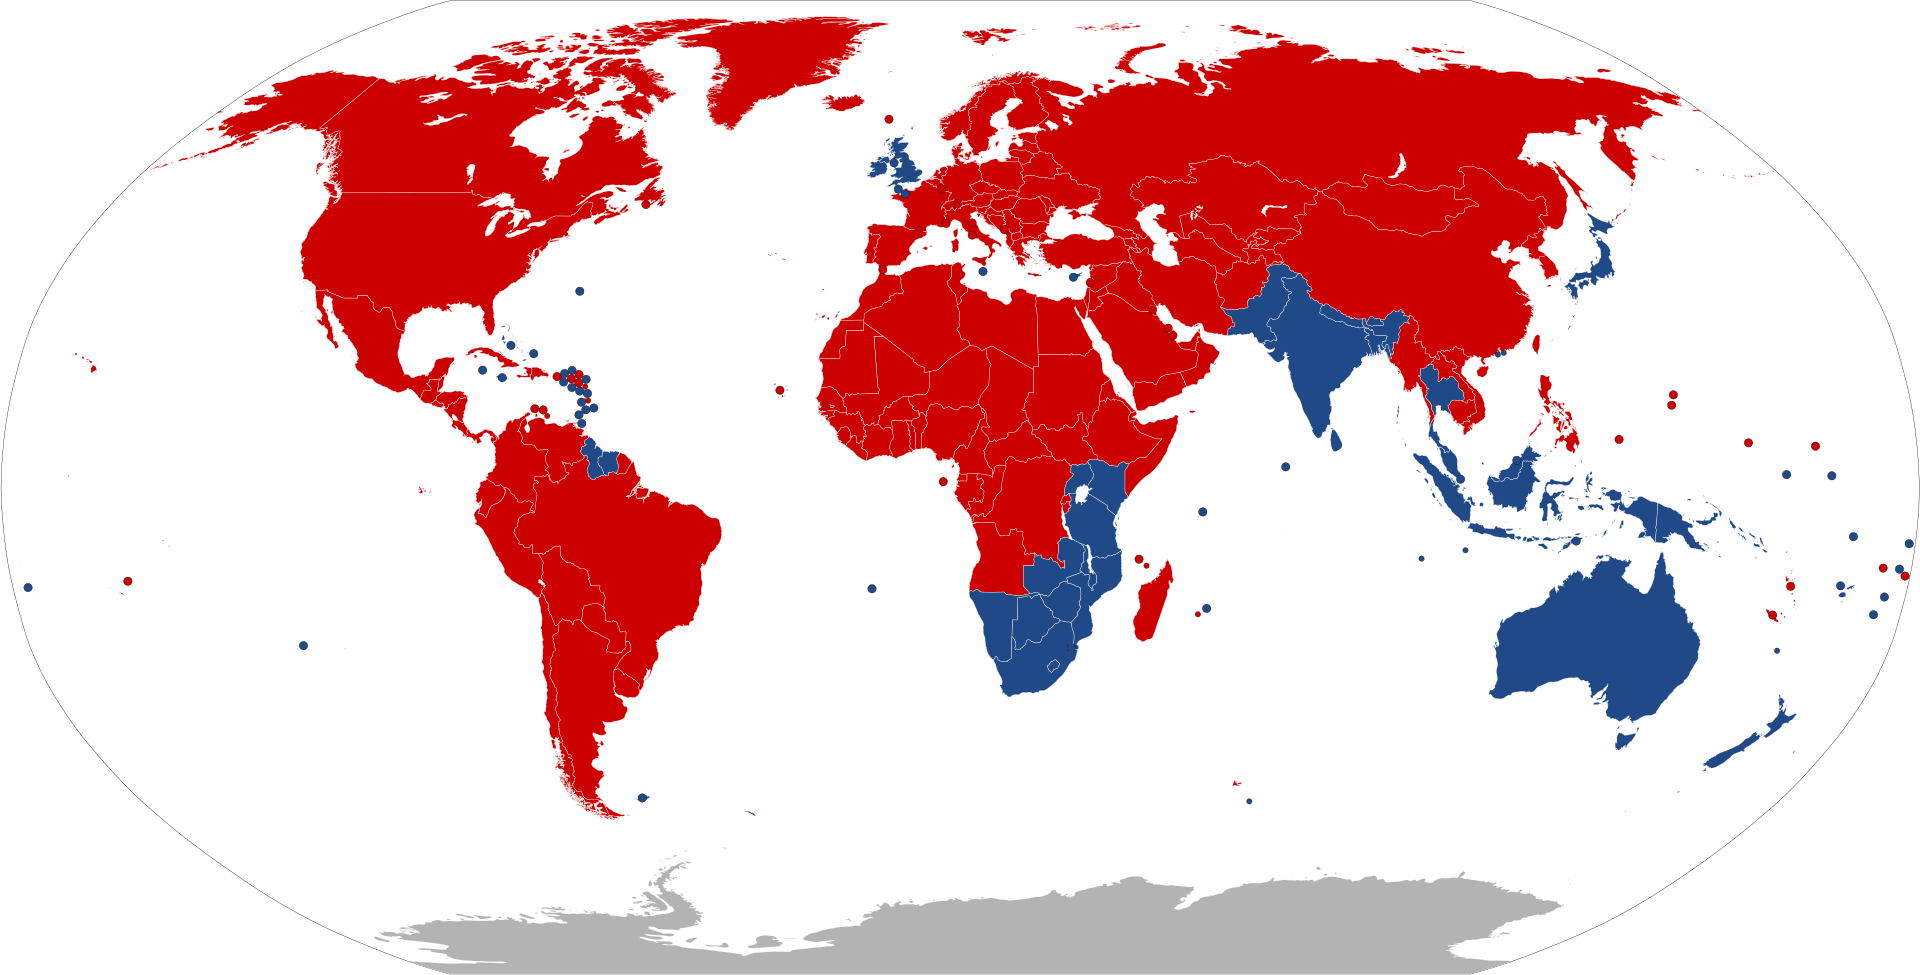 A map indicating which countries drive on the right side of the road, and which drive on the left side.